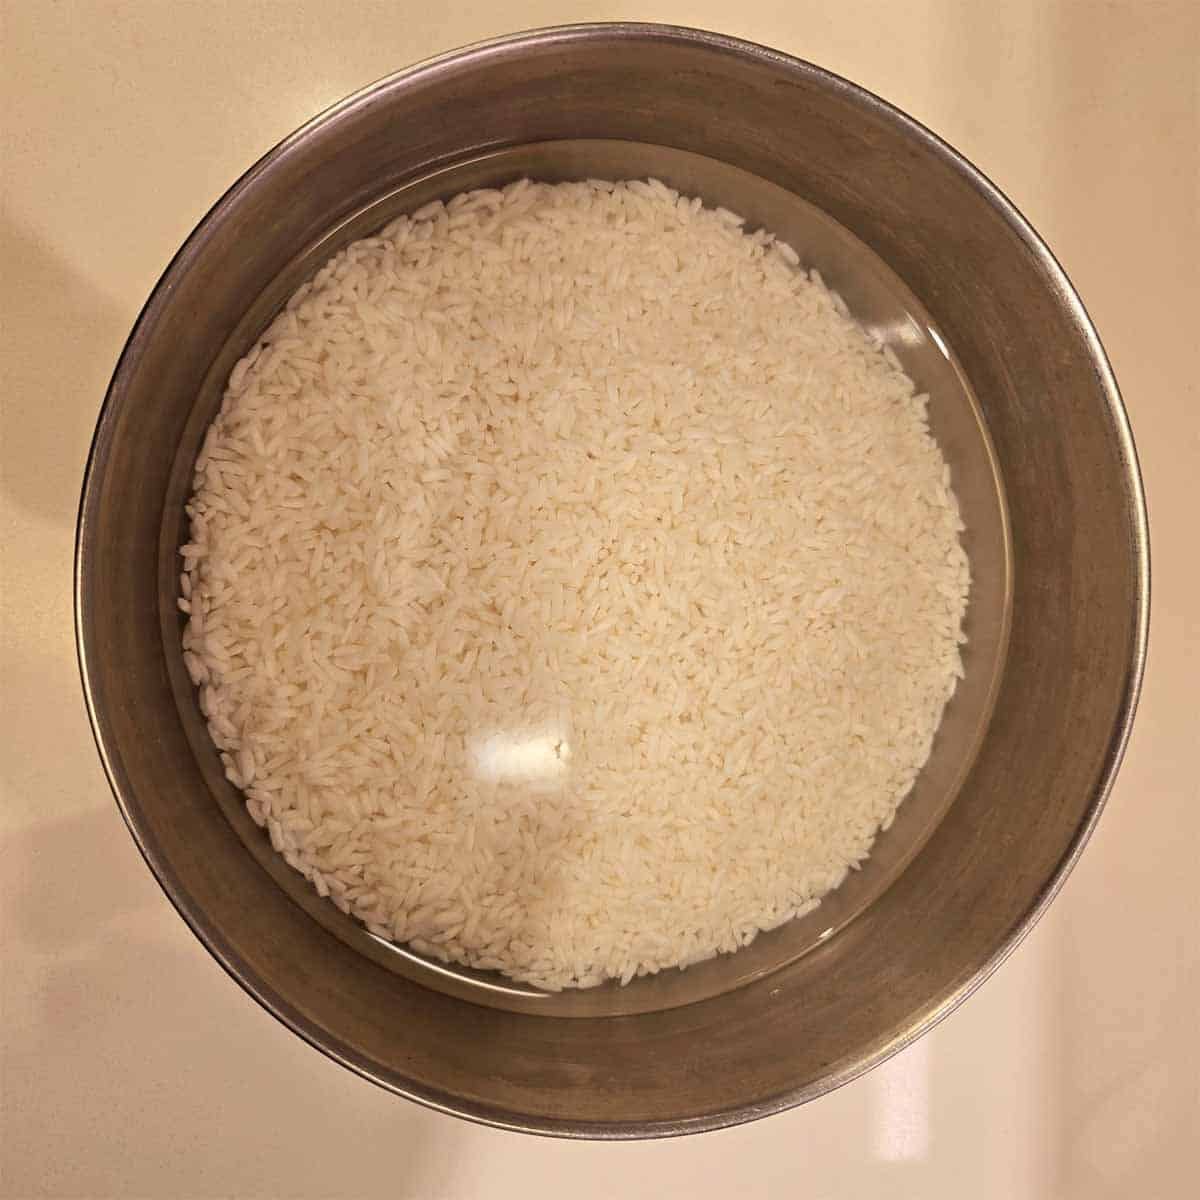 Sweet rice soaking in a bowl of water for 24 hours, with grains fully submerged and starting to absorb the water.